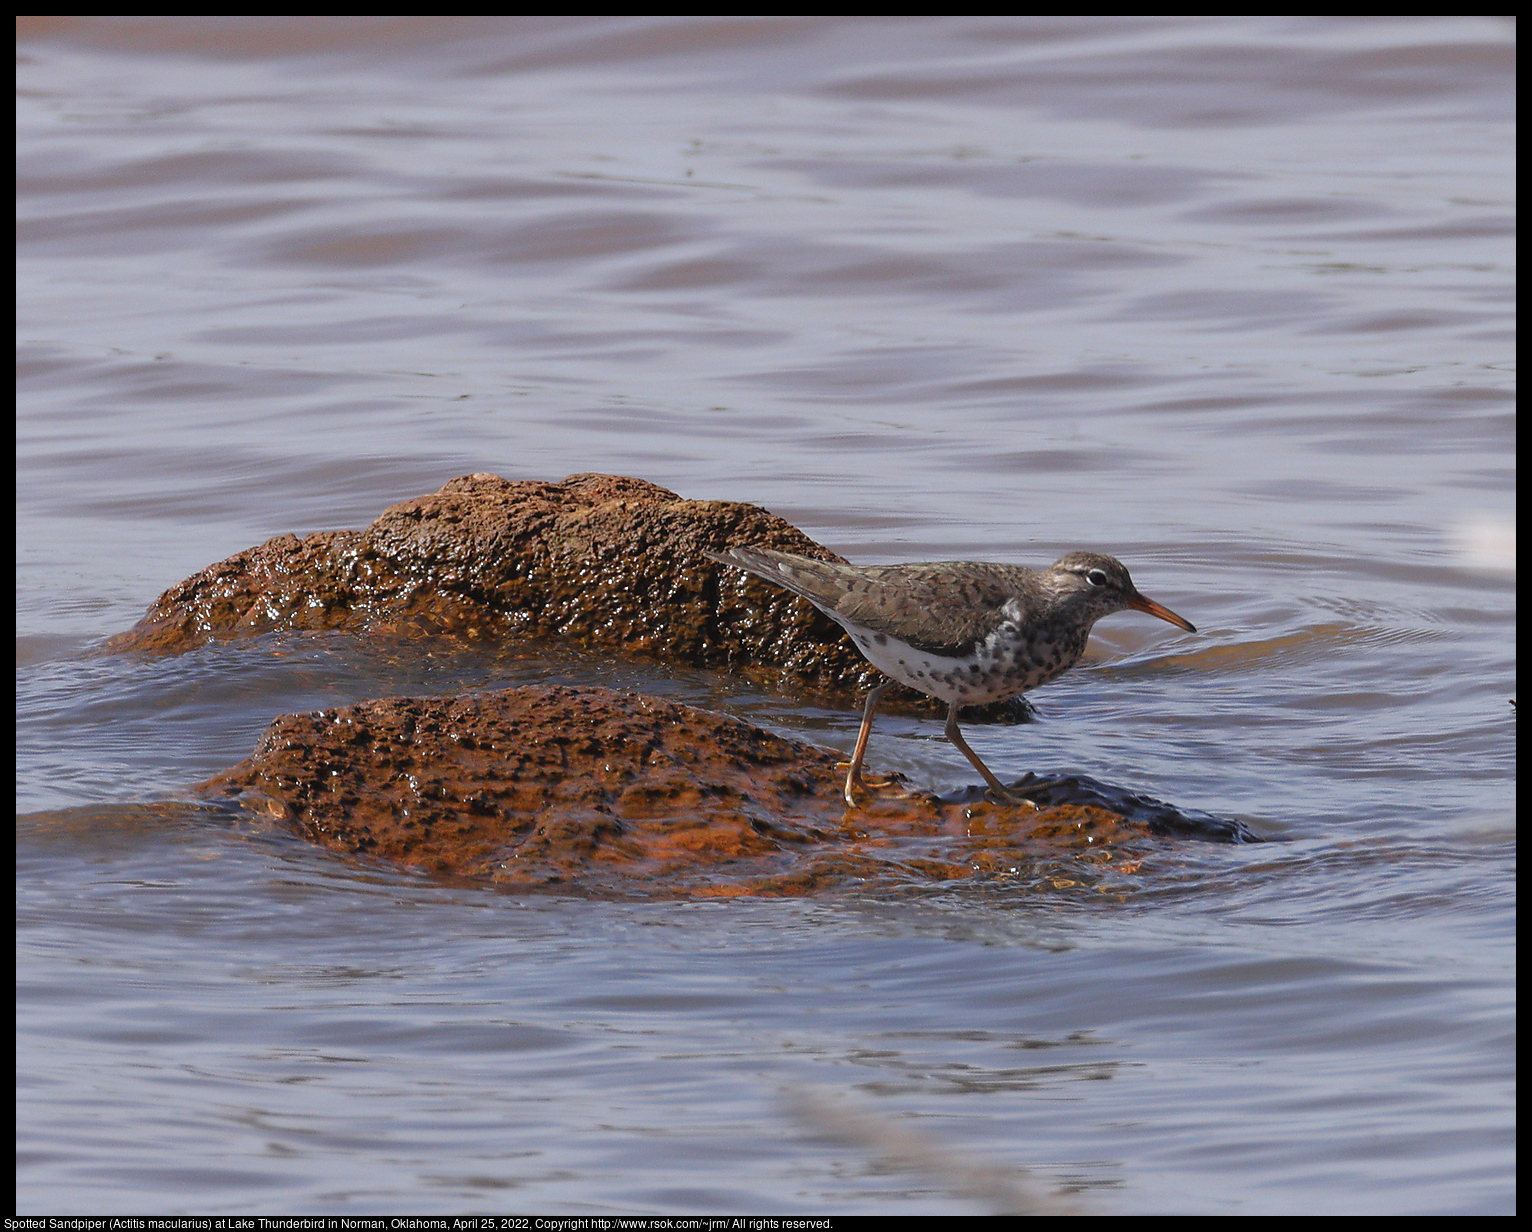 Spotted Sandpiper (Actitis macularius) at Lake Thunderbird in Norman, Oklahoma, April 25, 2022